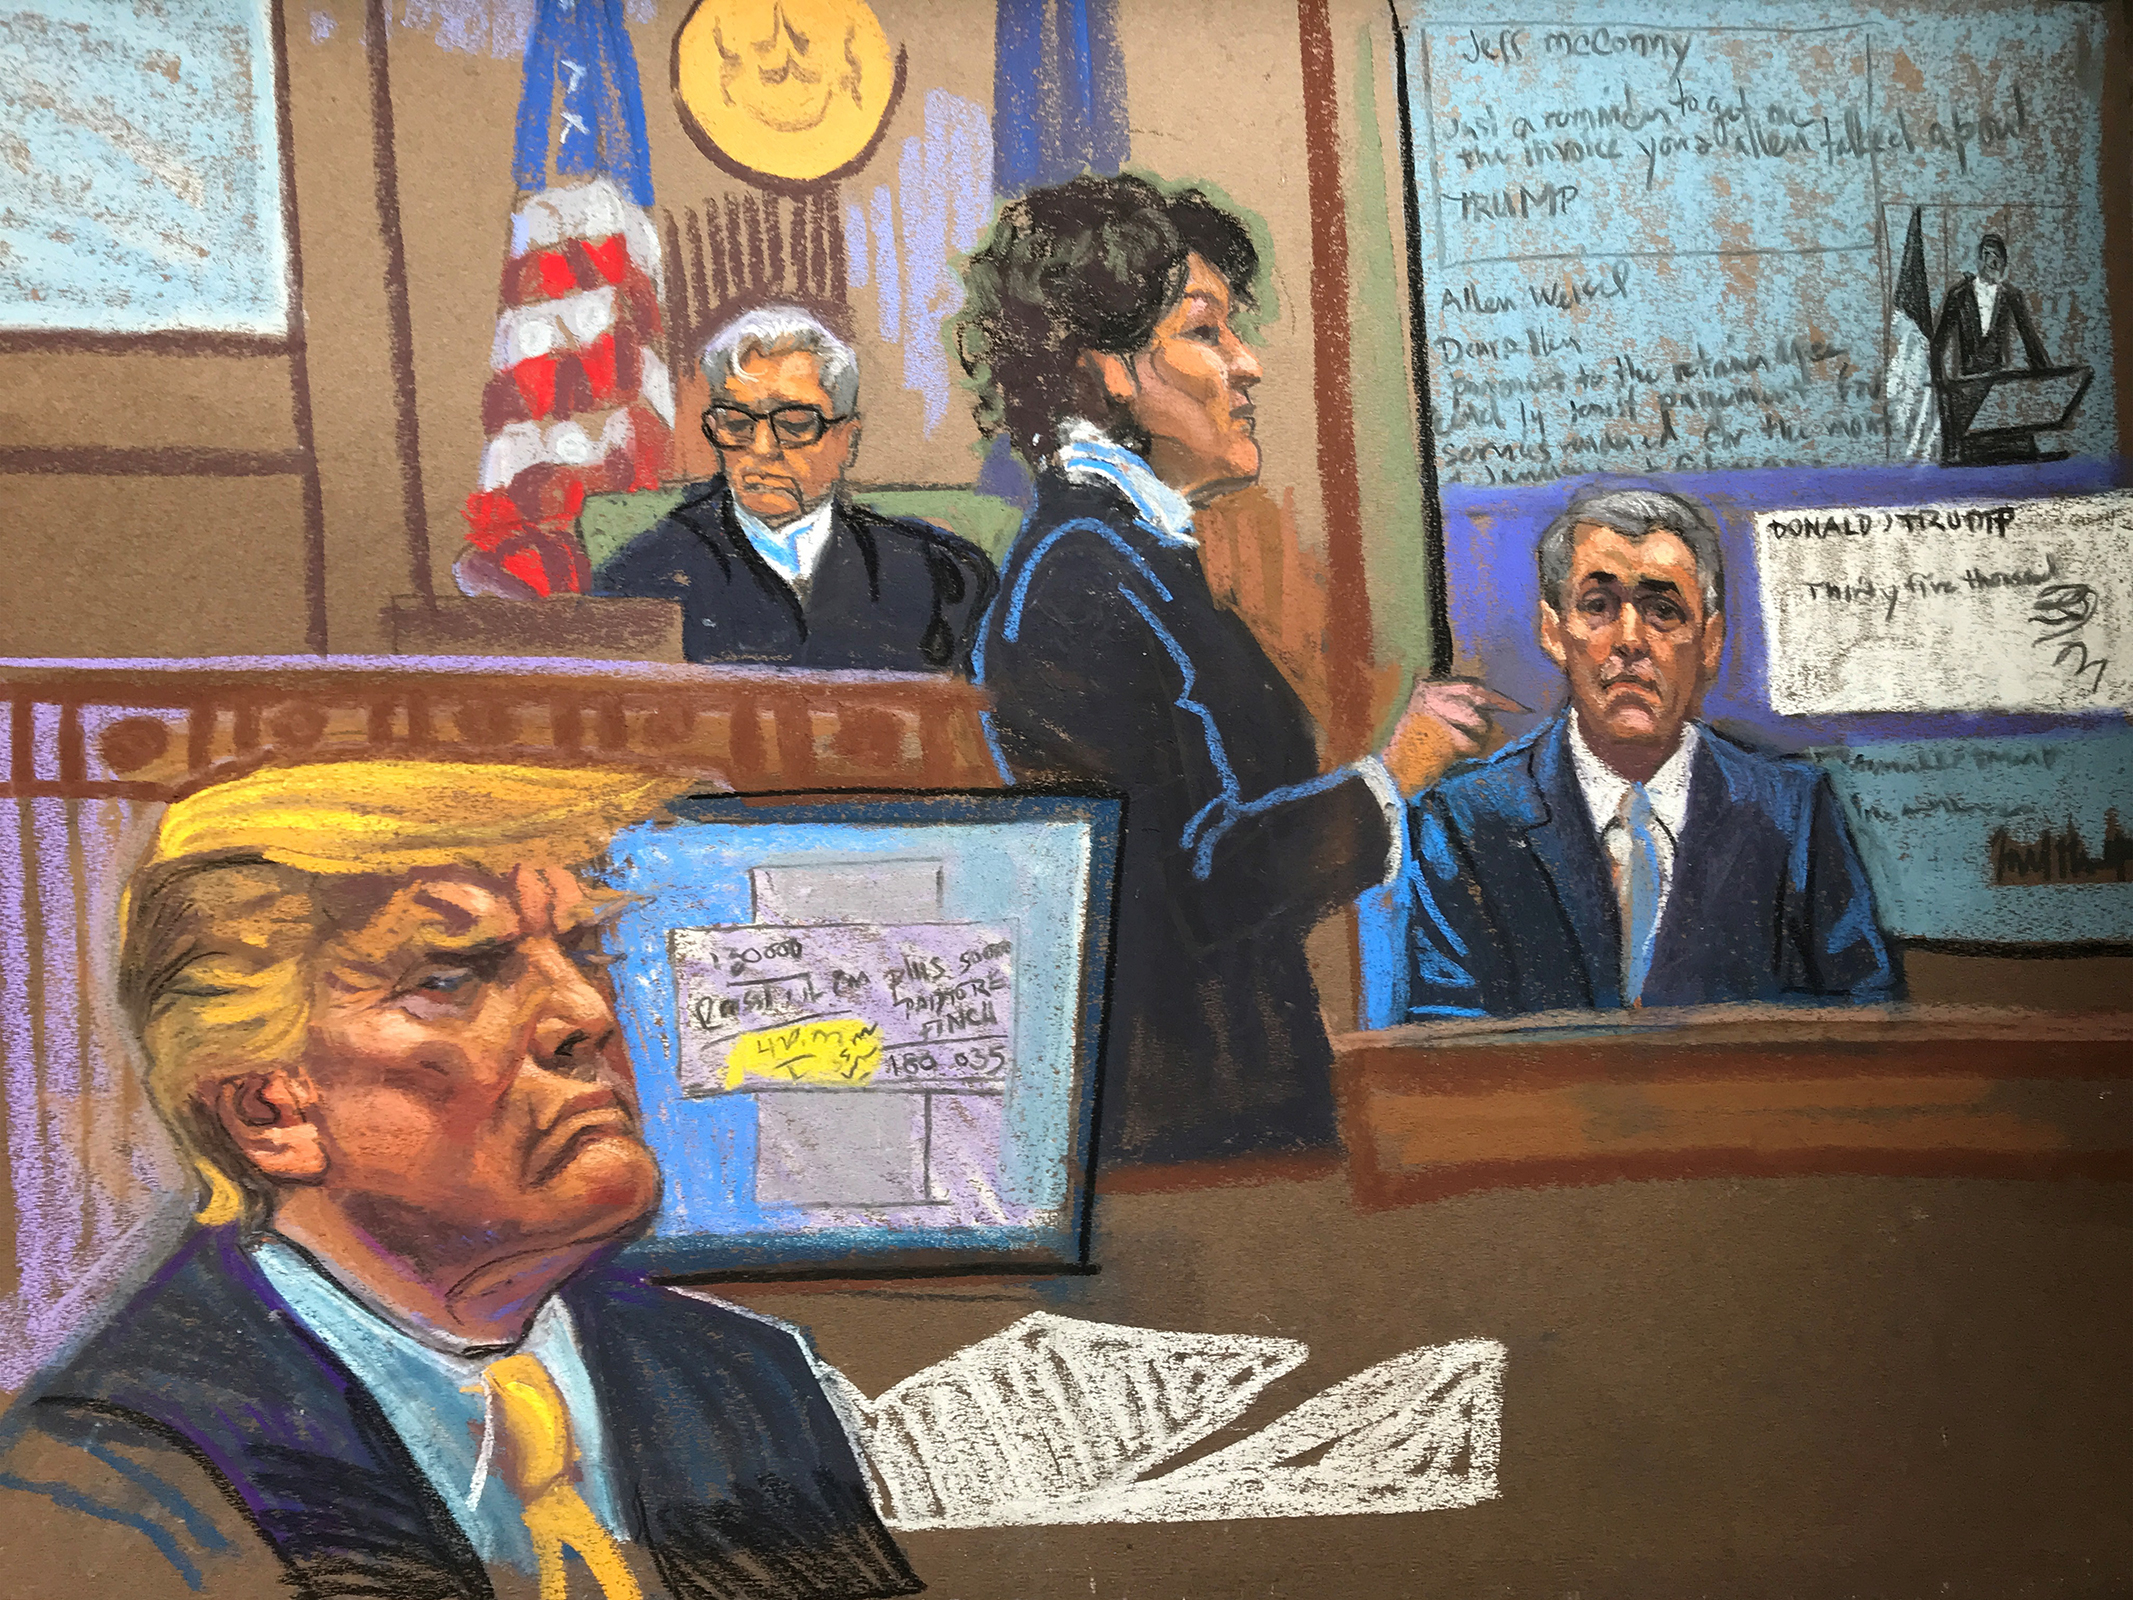 This sketch from court shows former President Donald Trump, left, and Michael Cohen, right, in court on Tuesday, May 14, in New York.